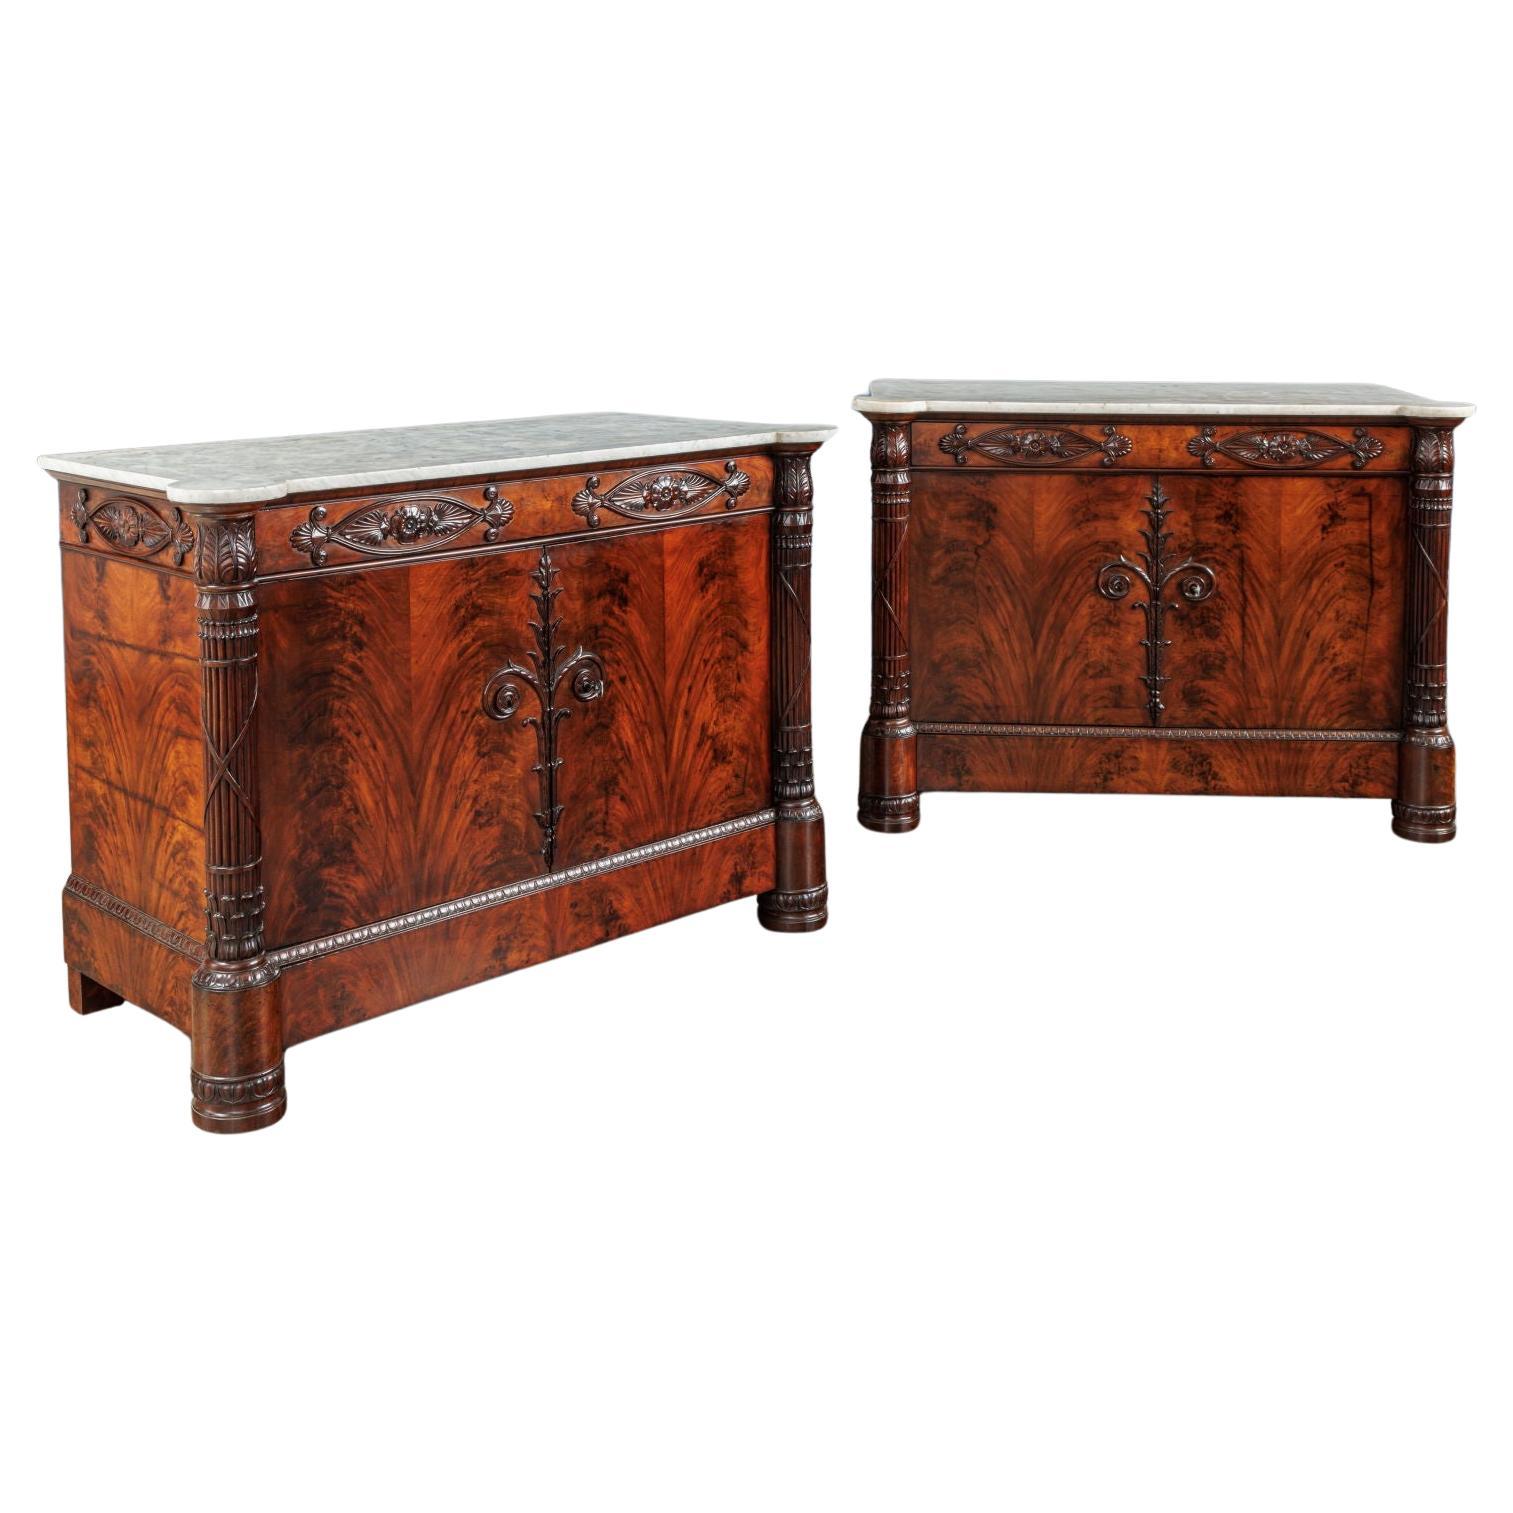 Pair of sideboards Lucchese manufacture second decade of the 19th century